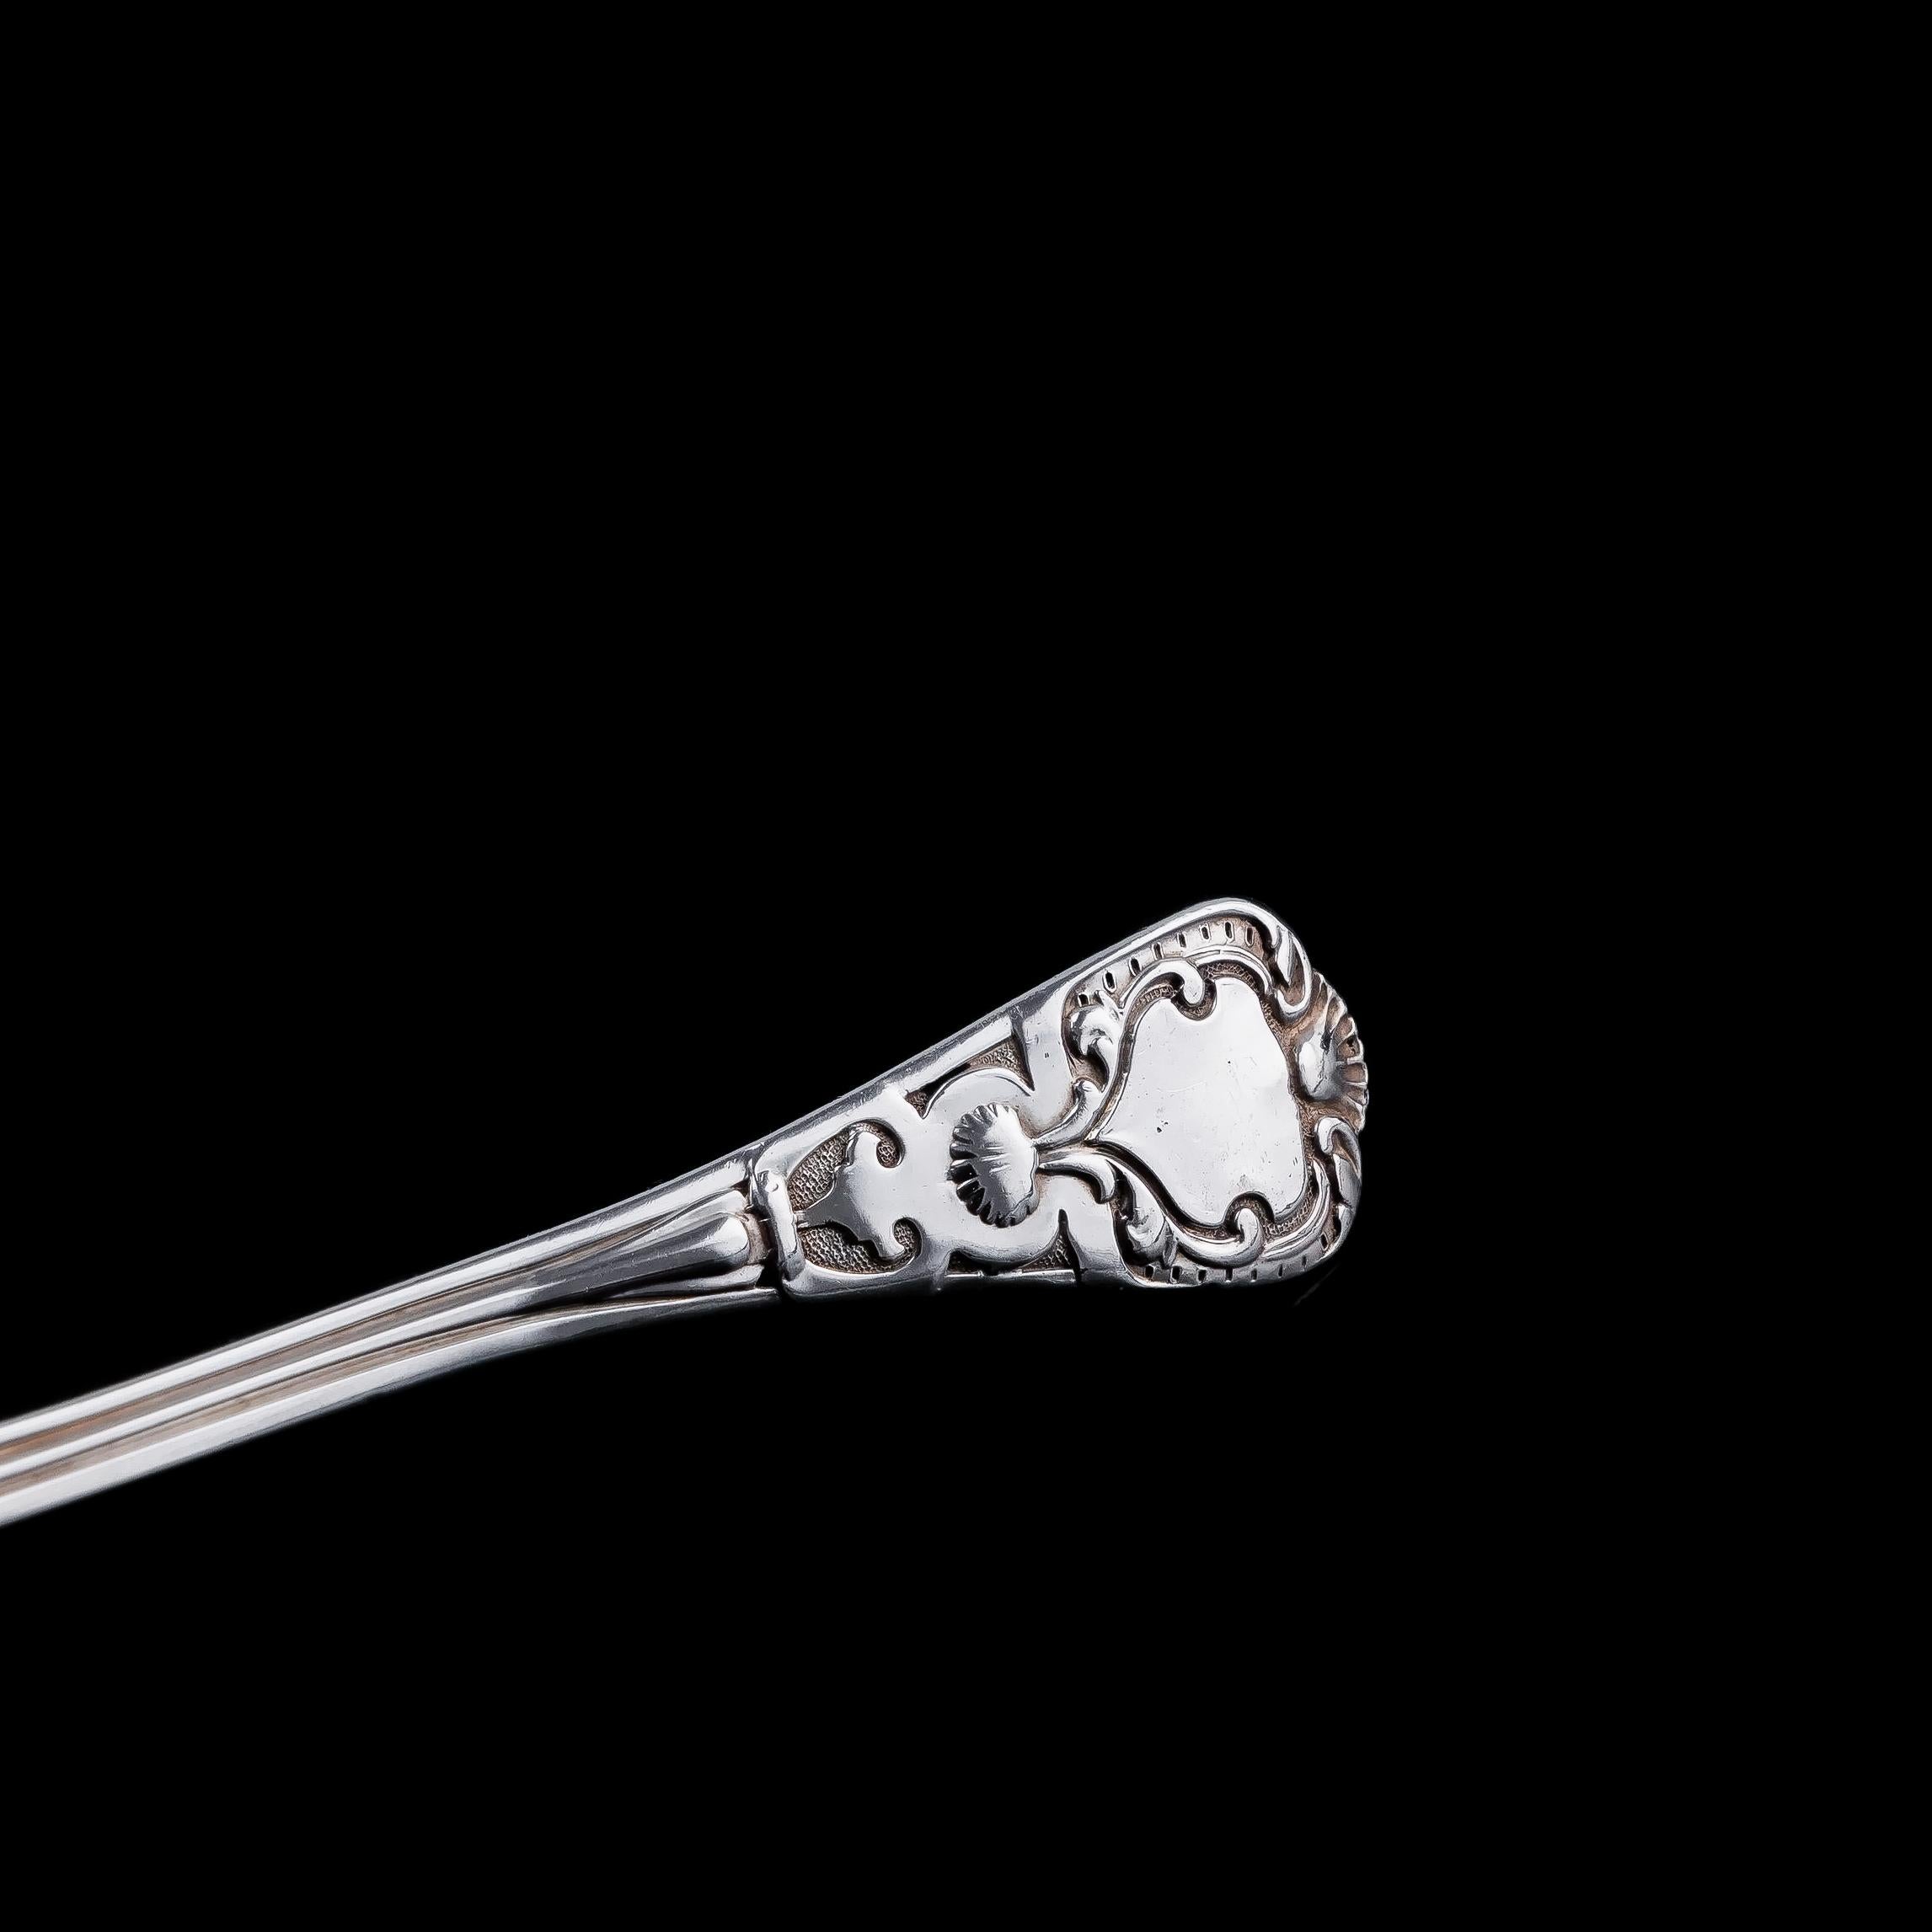 Sterling Silver Antique Solid Silver Sugar Sifter Spoon, Francis Higgins, 1856